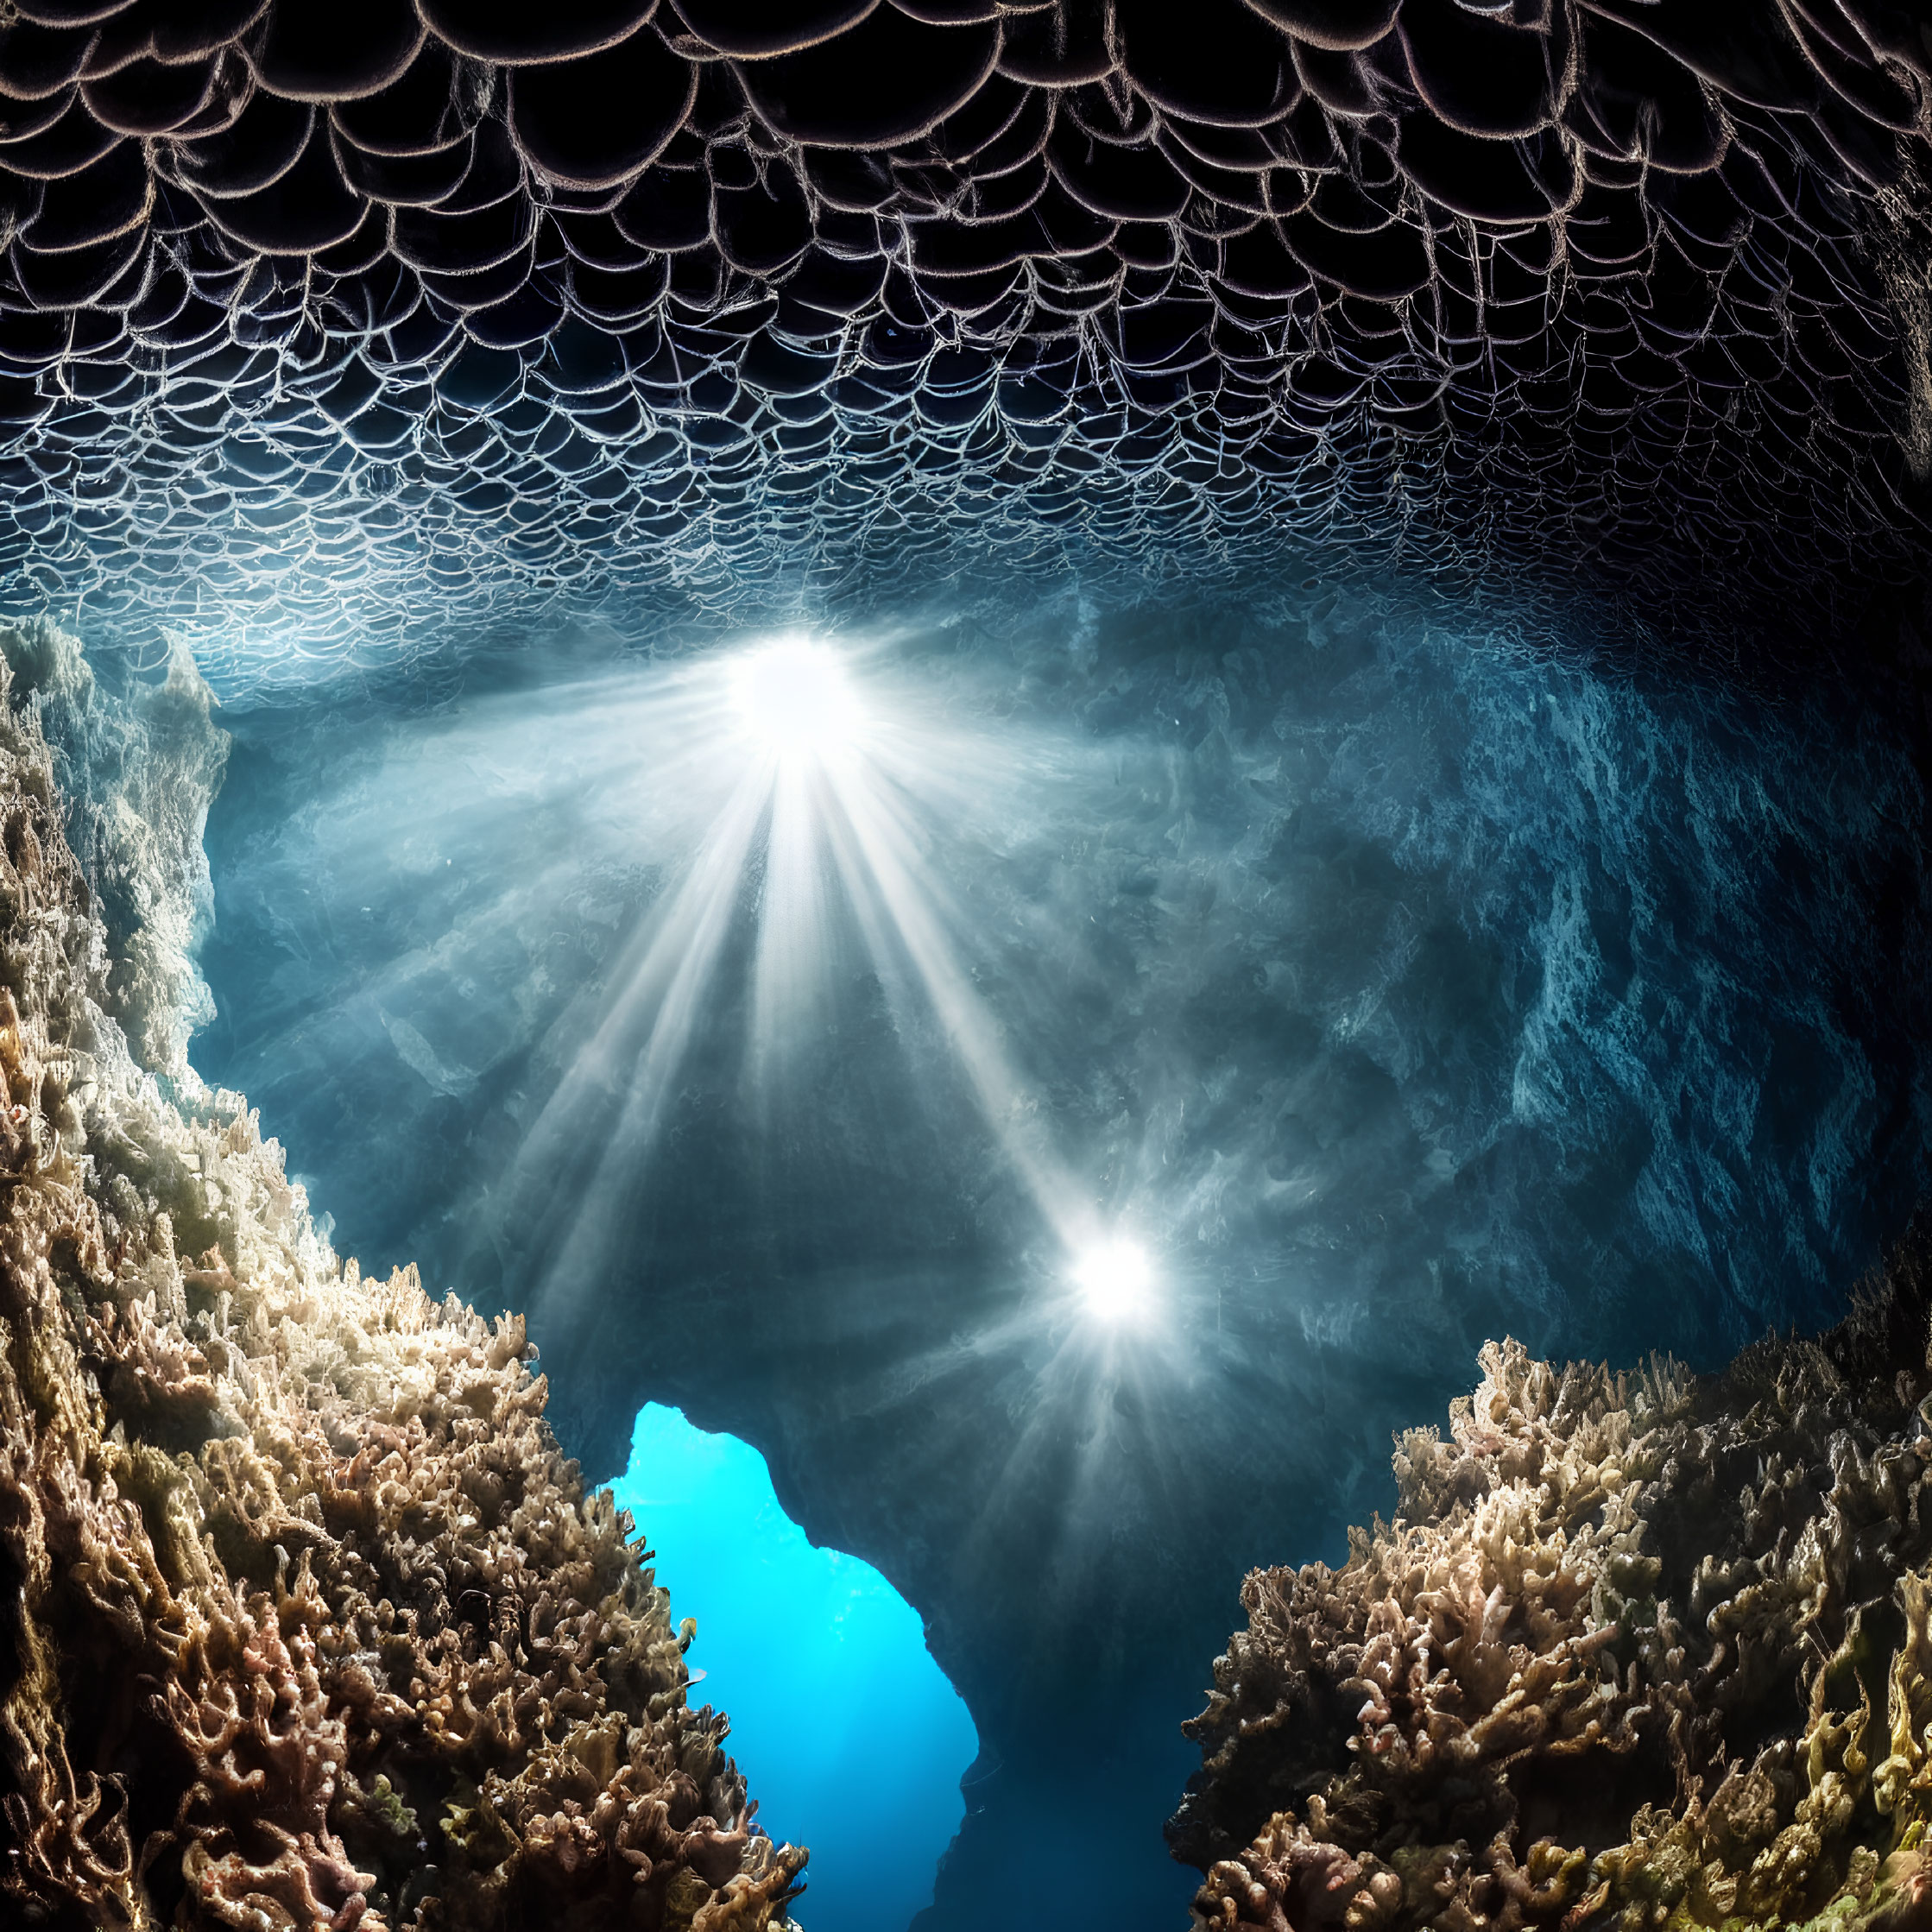 Sunlight illuminates coral and rock formations in underwater caves.